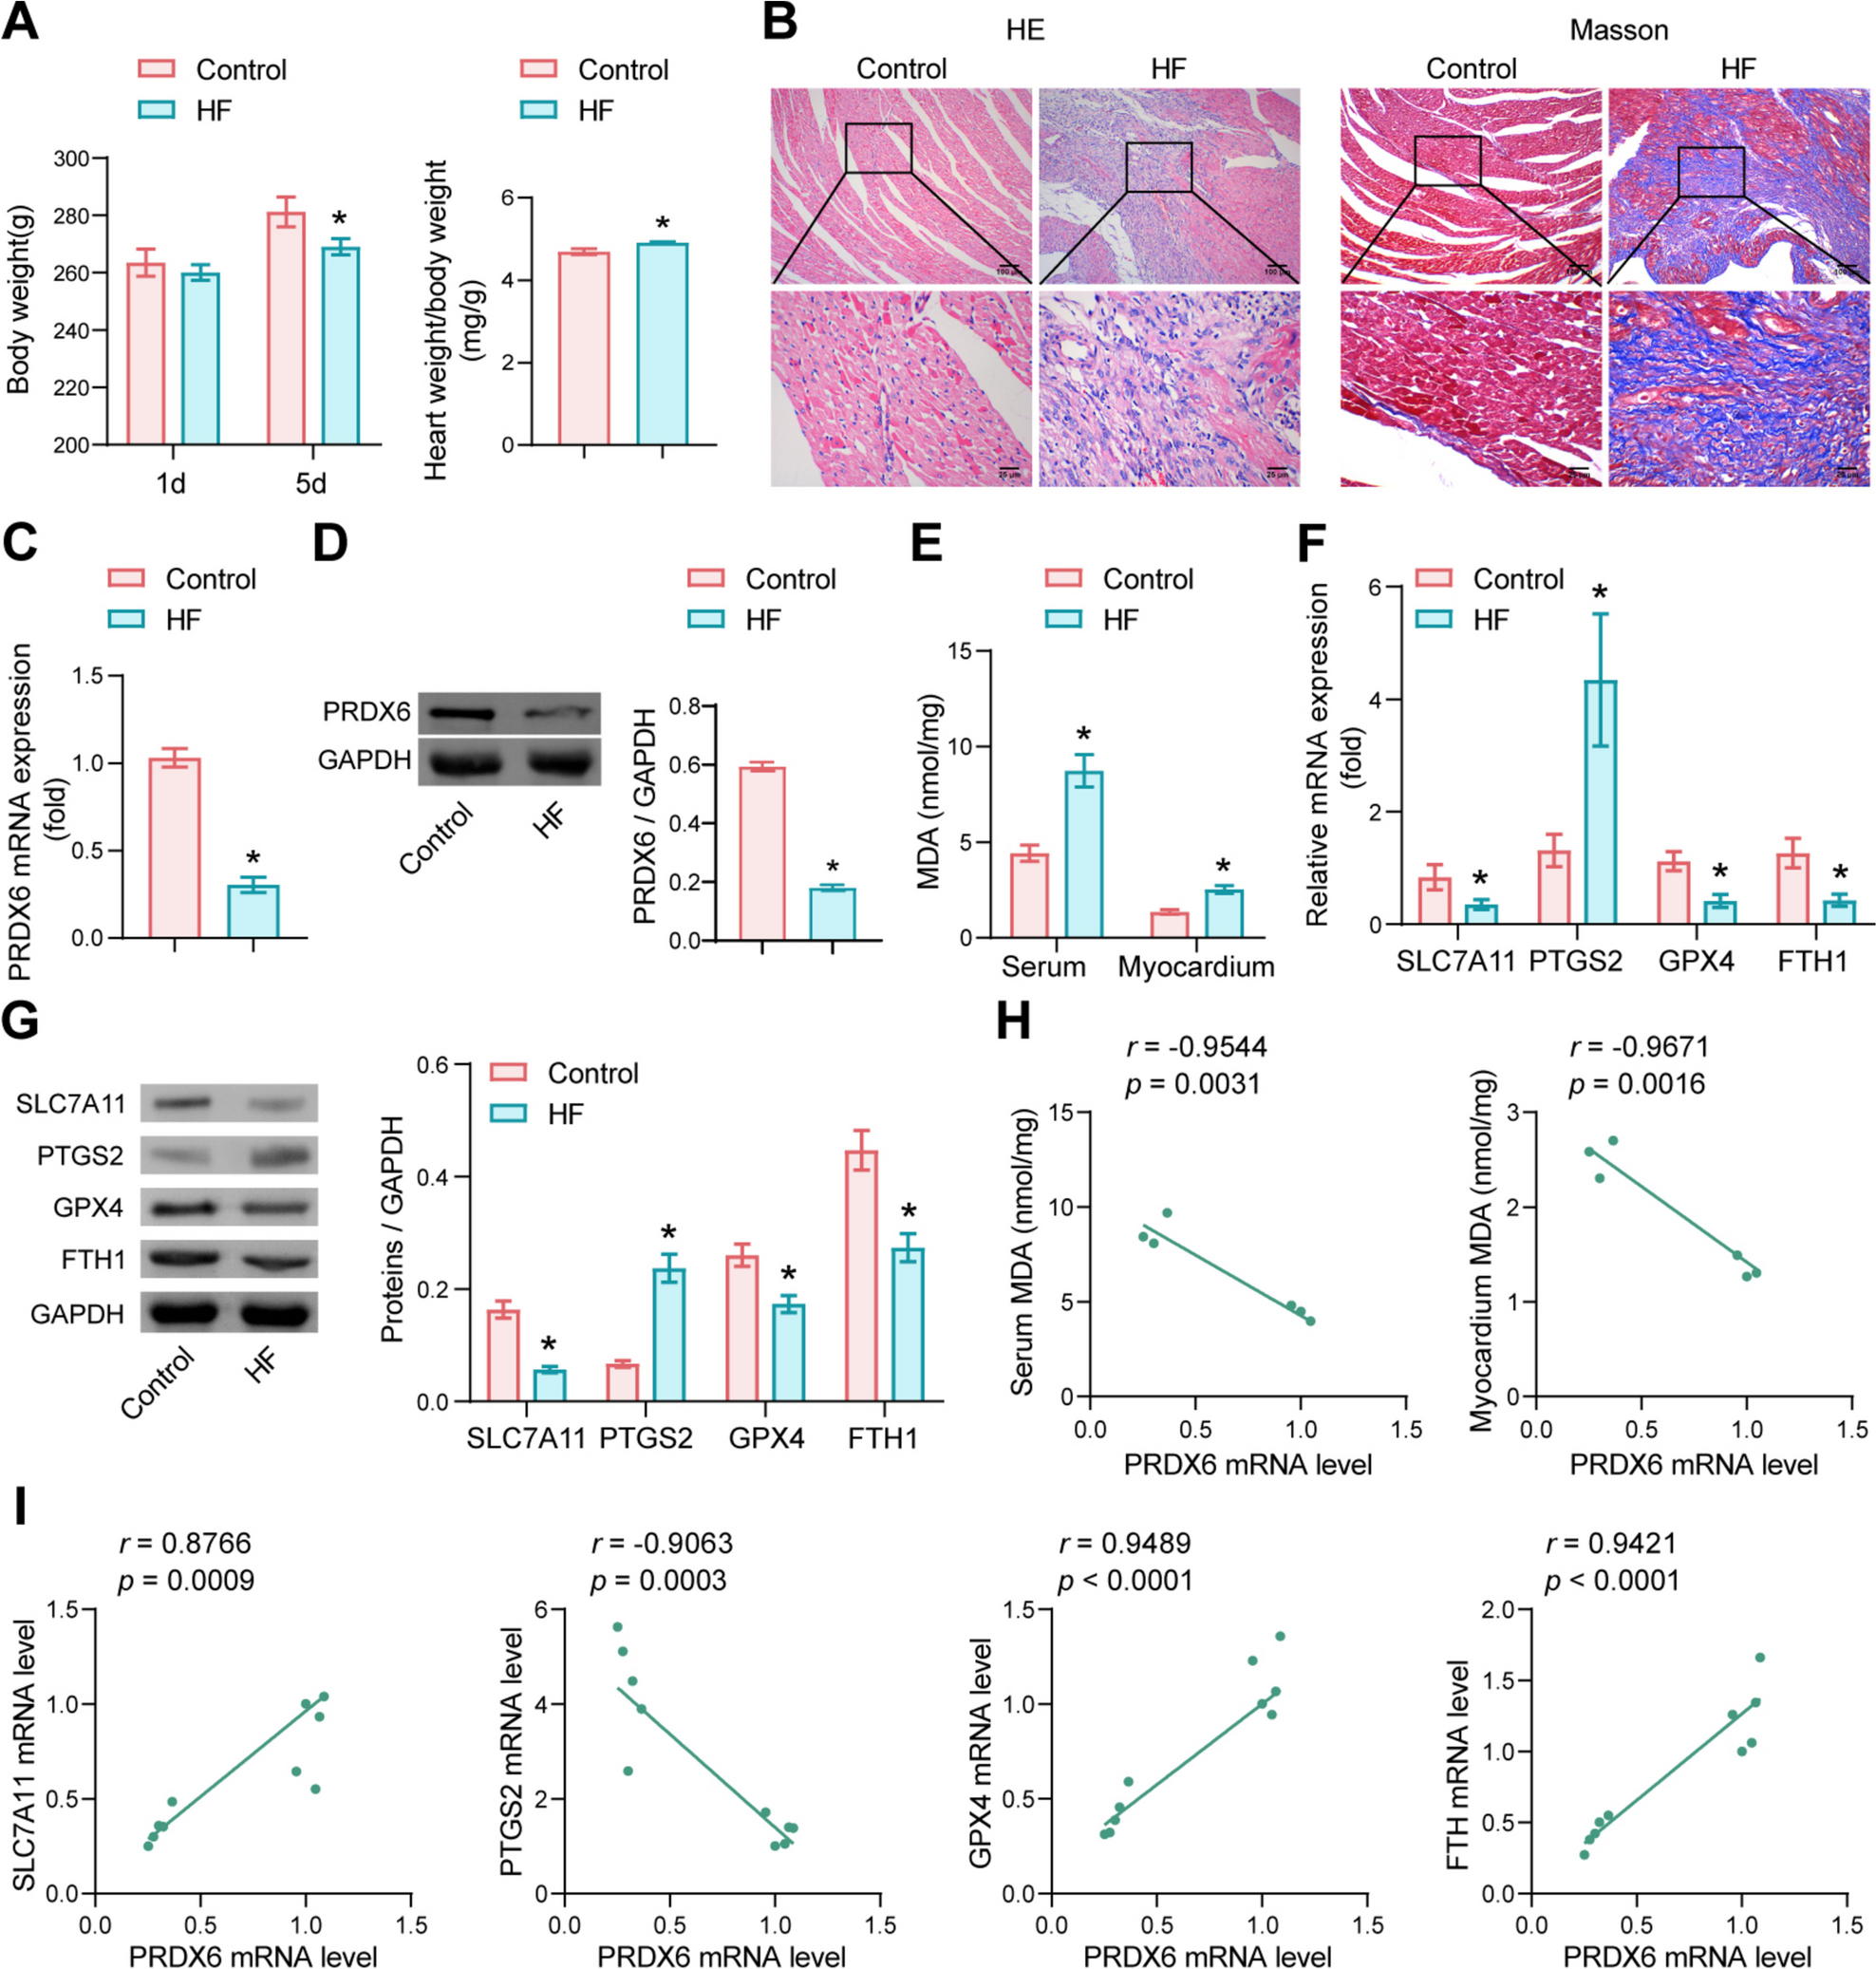 PRDX6 alleviated heart failure by inhibiting doxorubicin-induced ferroptosis through the JAK2/STAT1 pathway inactivation